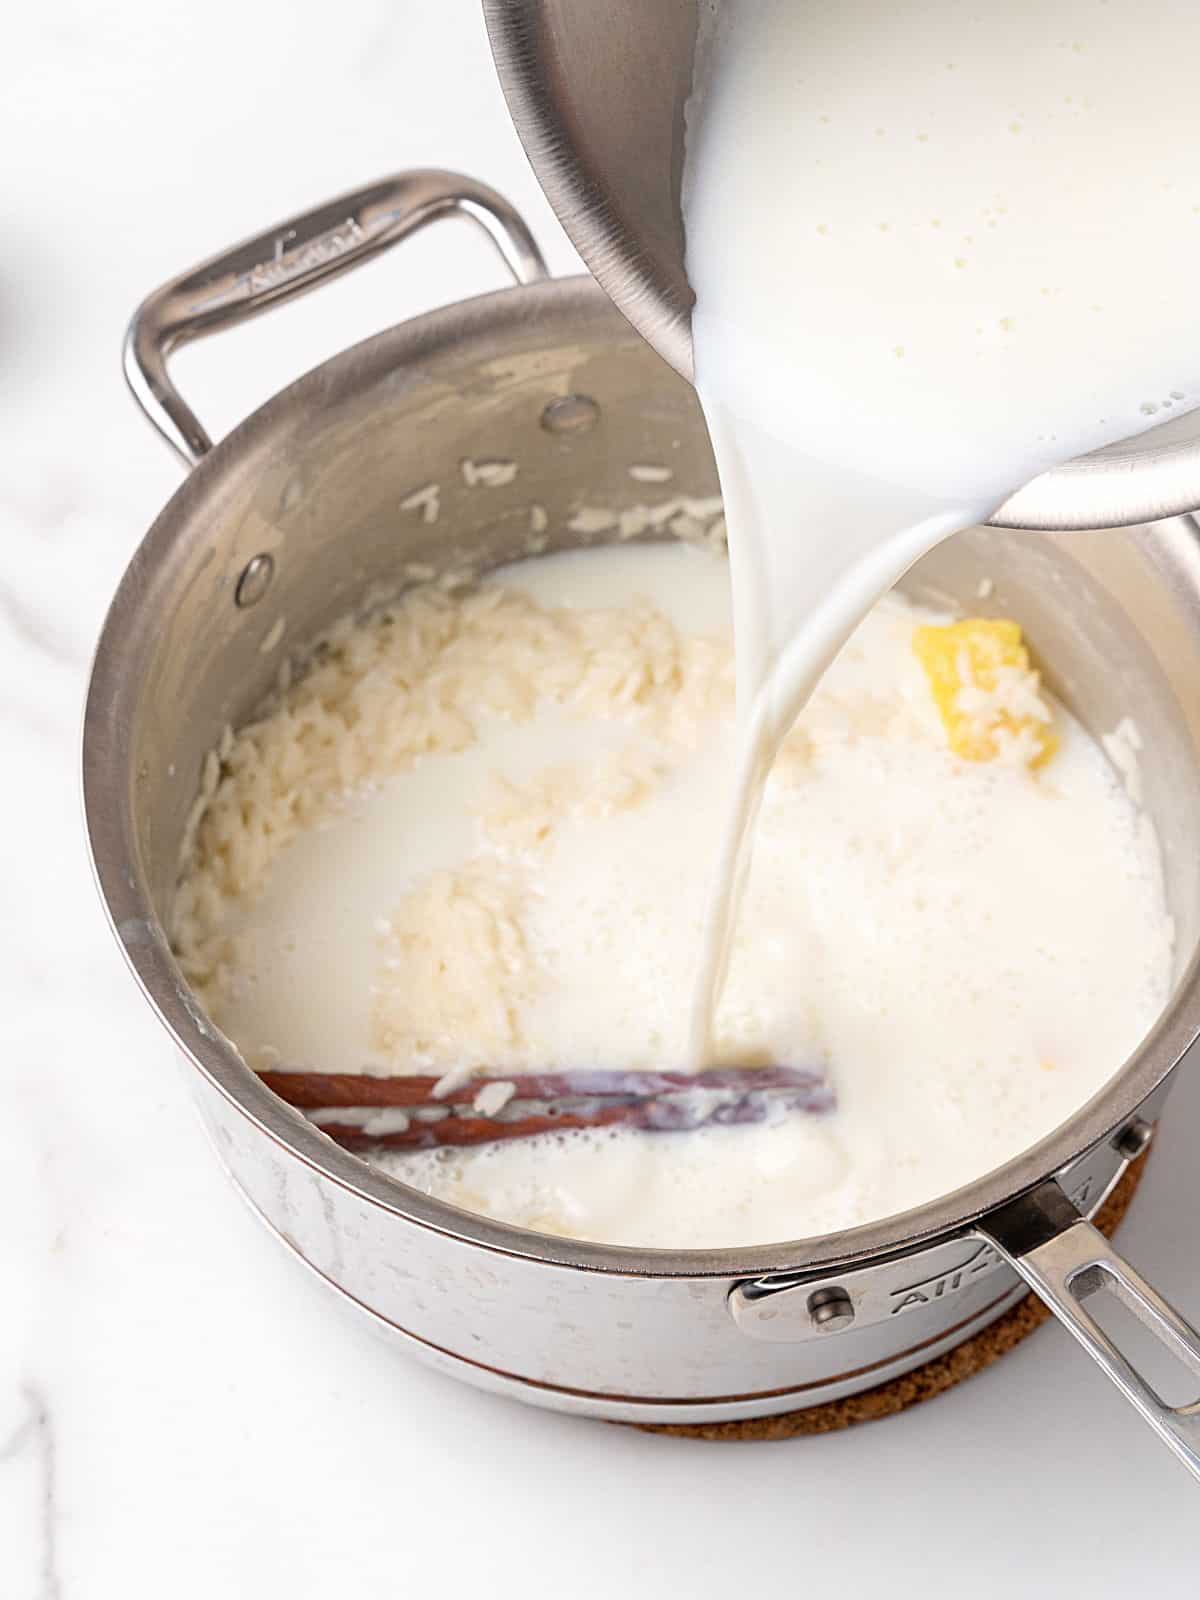 Adding milk to a saucepan with rice, more milk and cinnamon sticks. White marble surface.